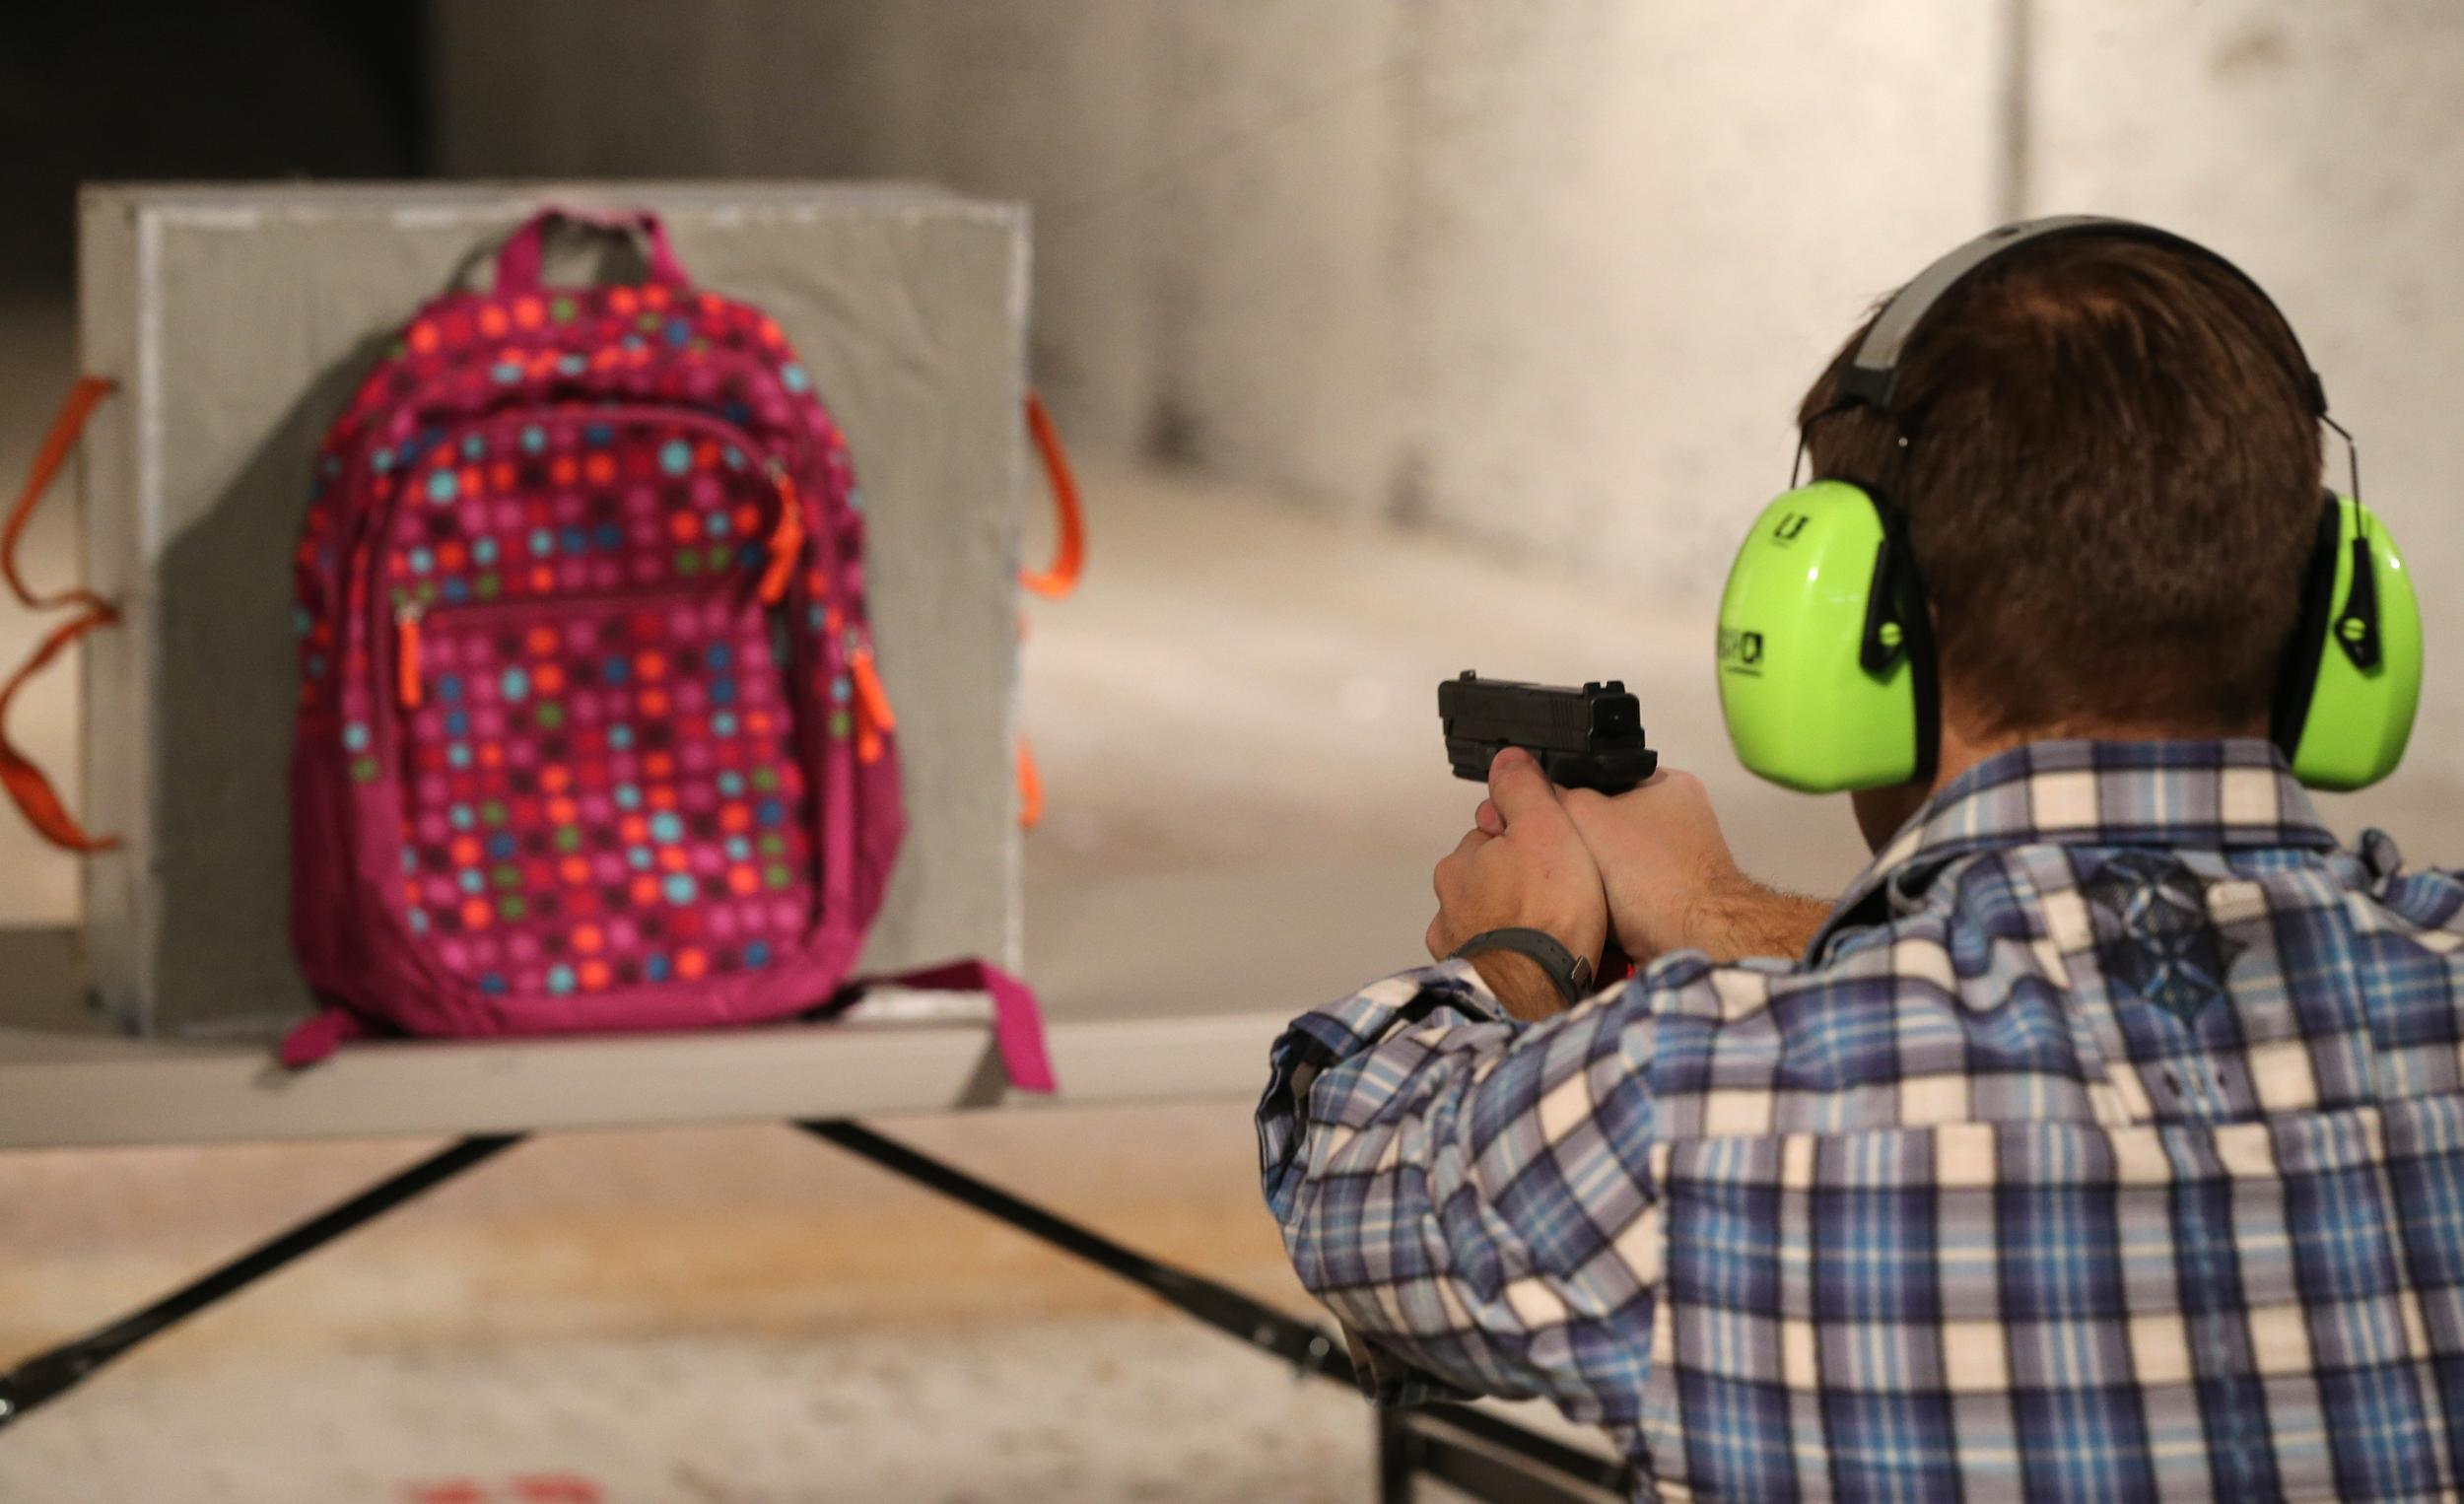 Rich Brand shoots a child's backpack with an Amendment II shield in it, similar to that being offered by a school in Florida